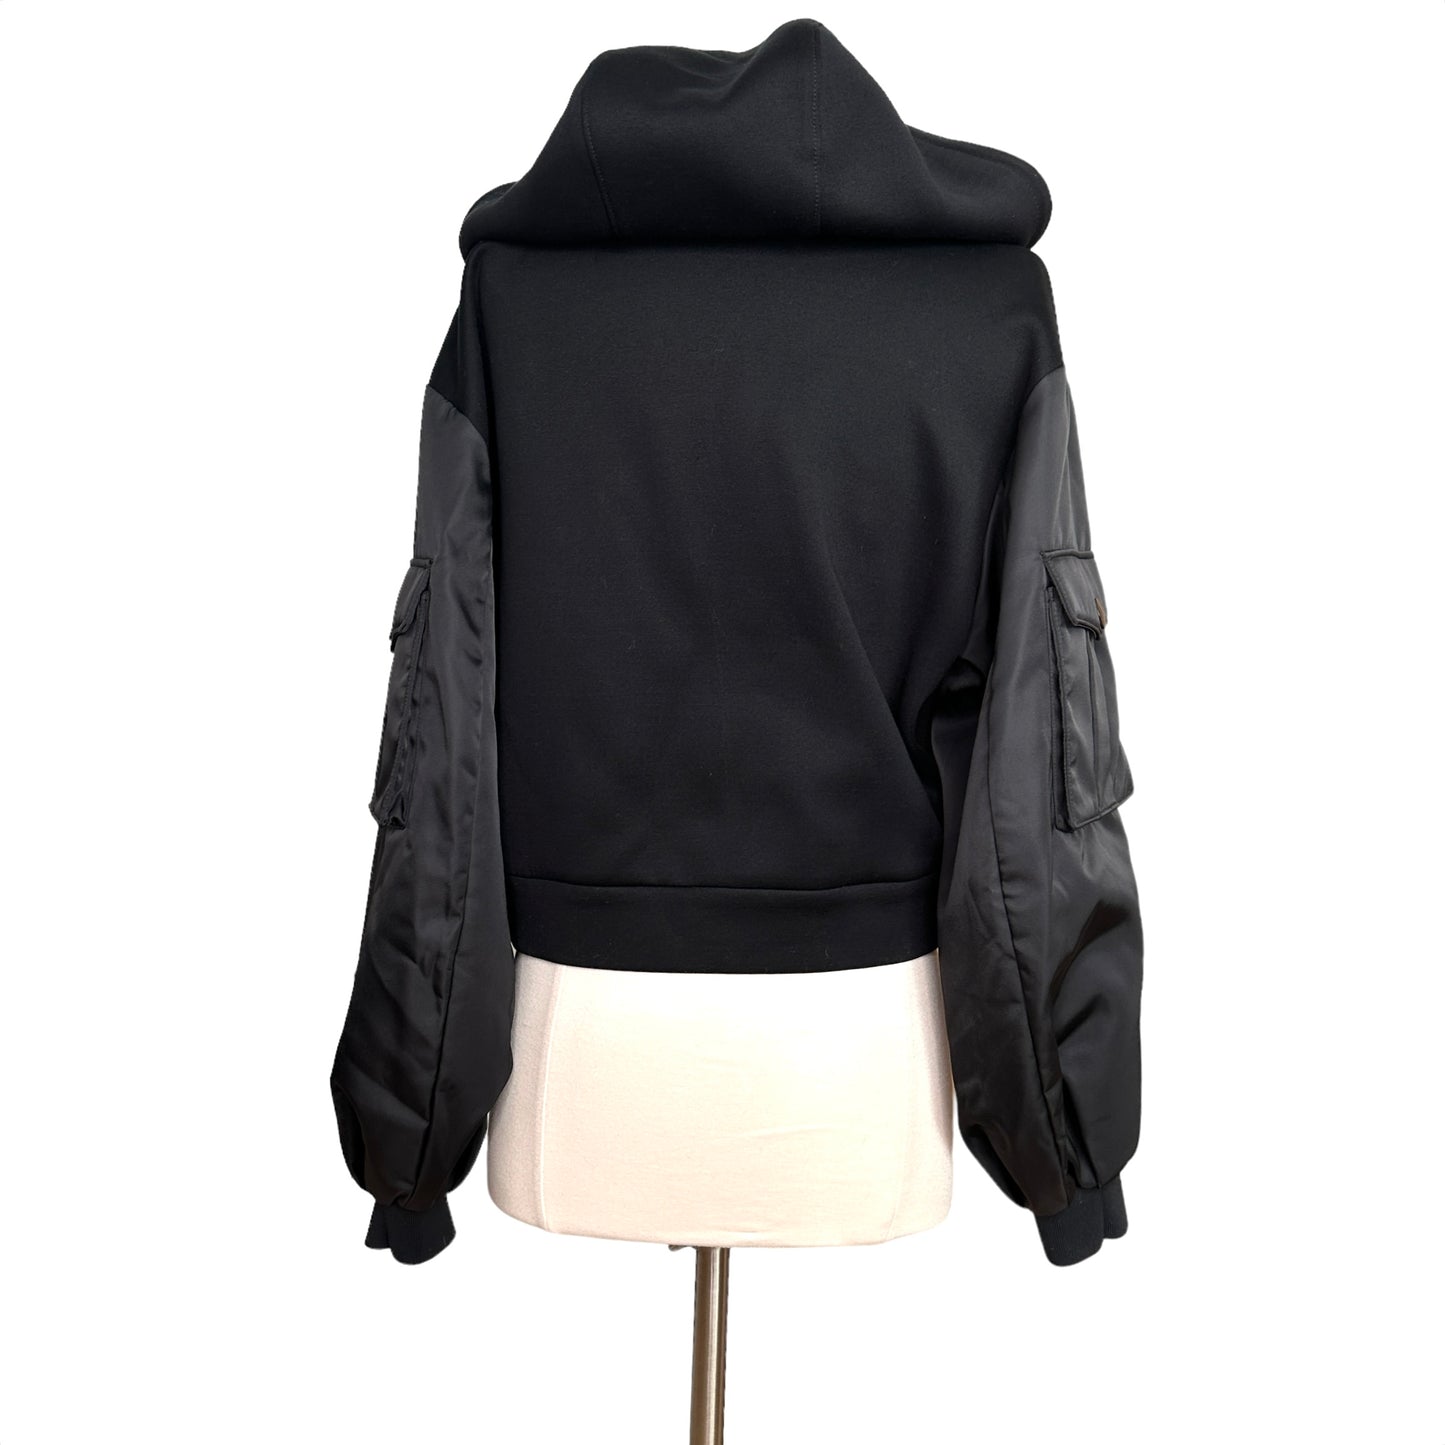 Hooded Sweater/Jacket - S